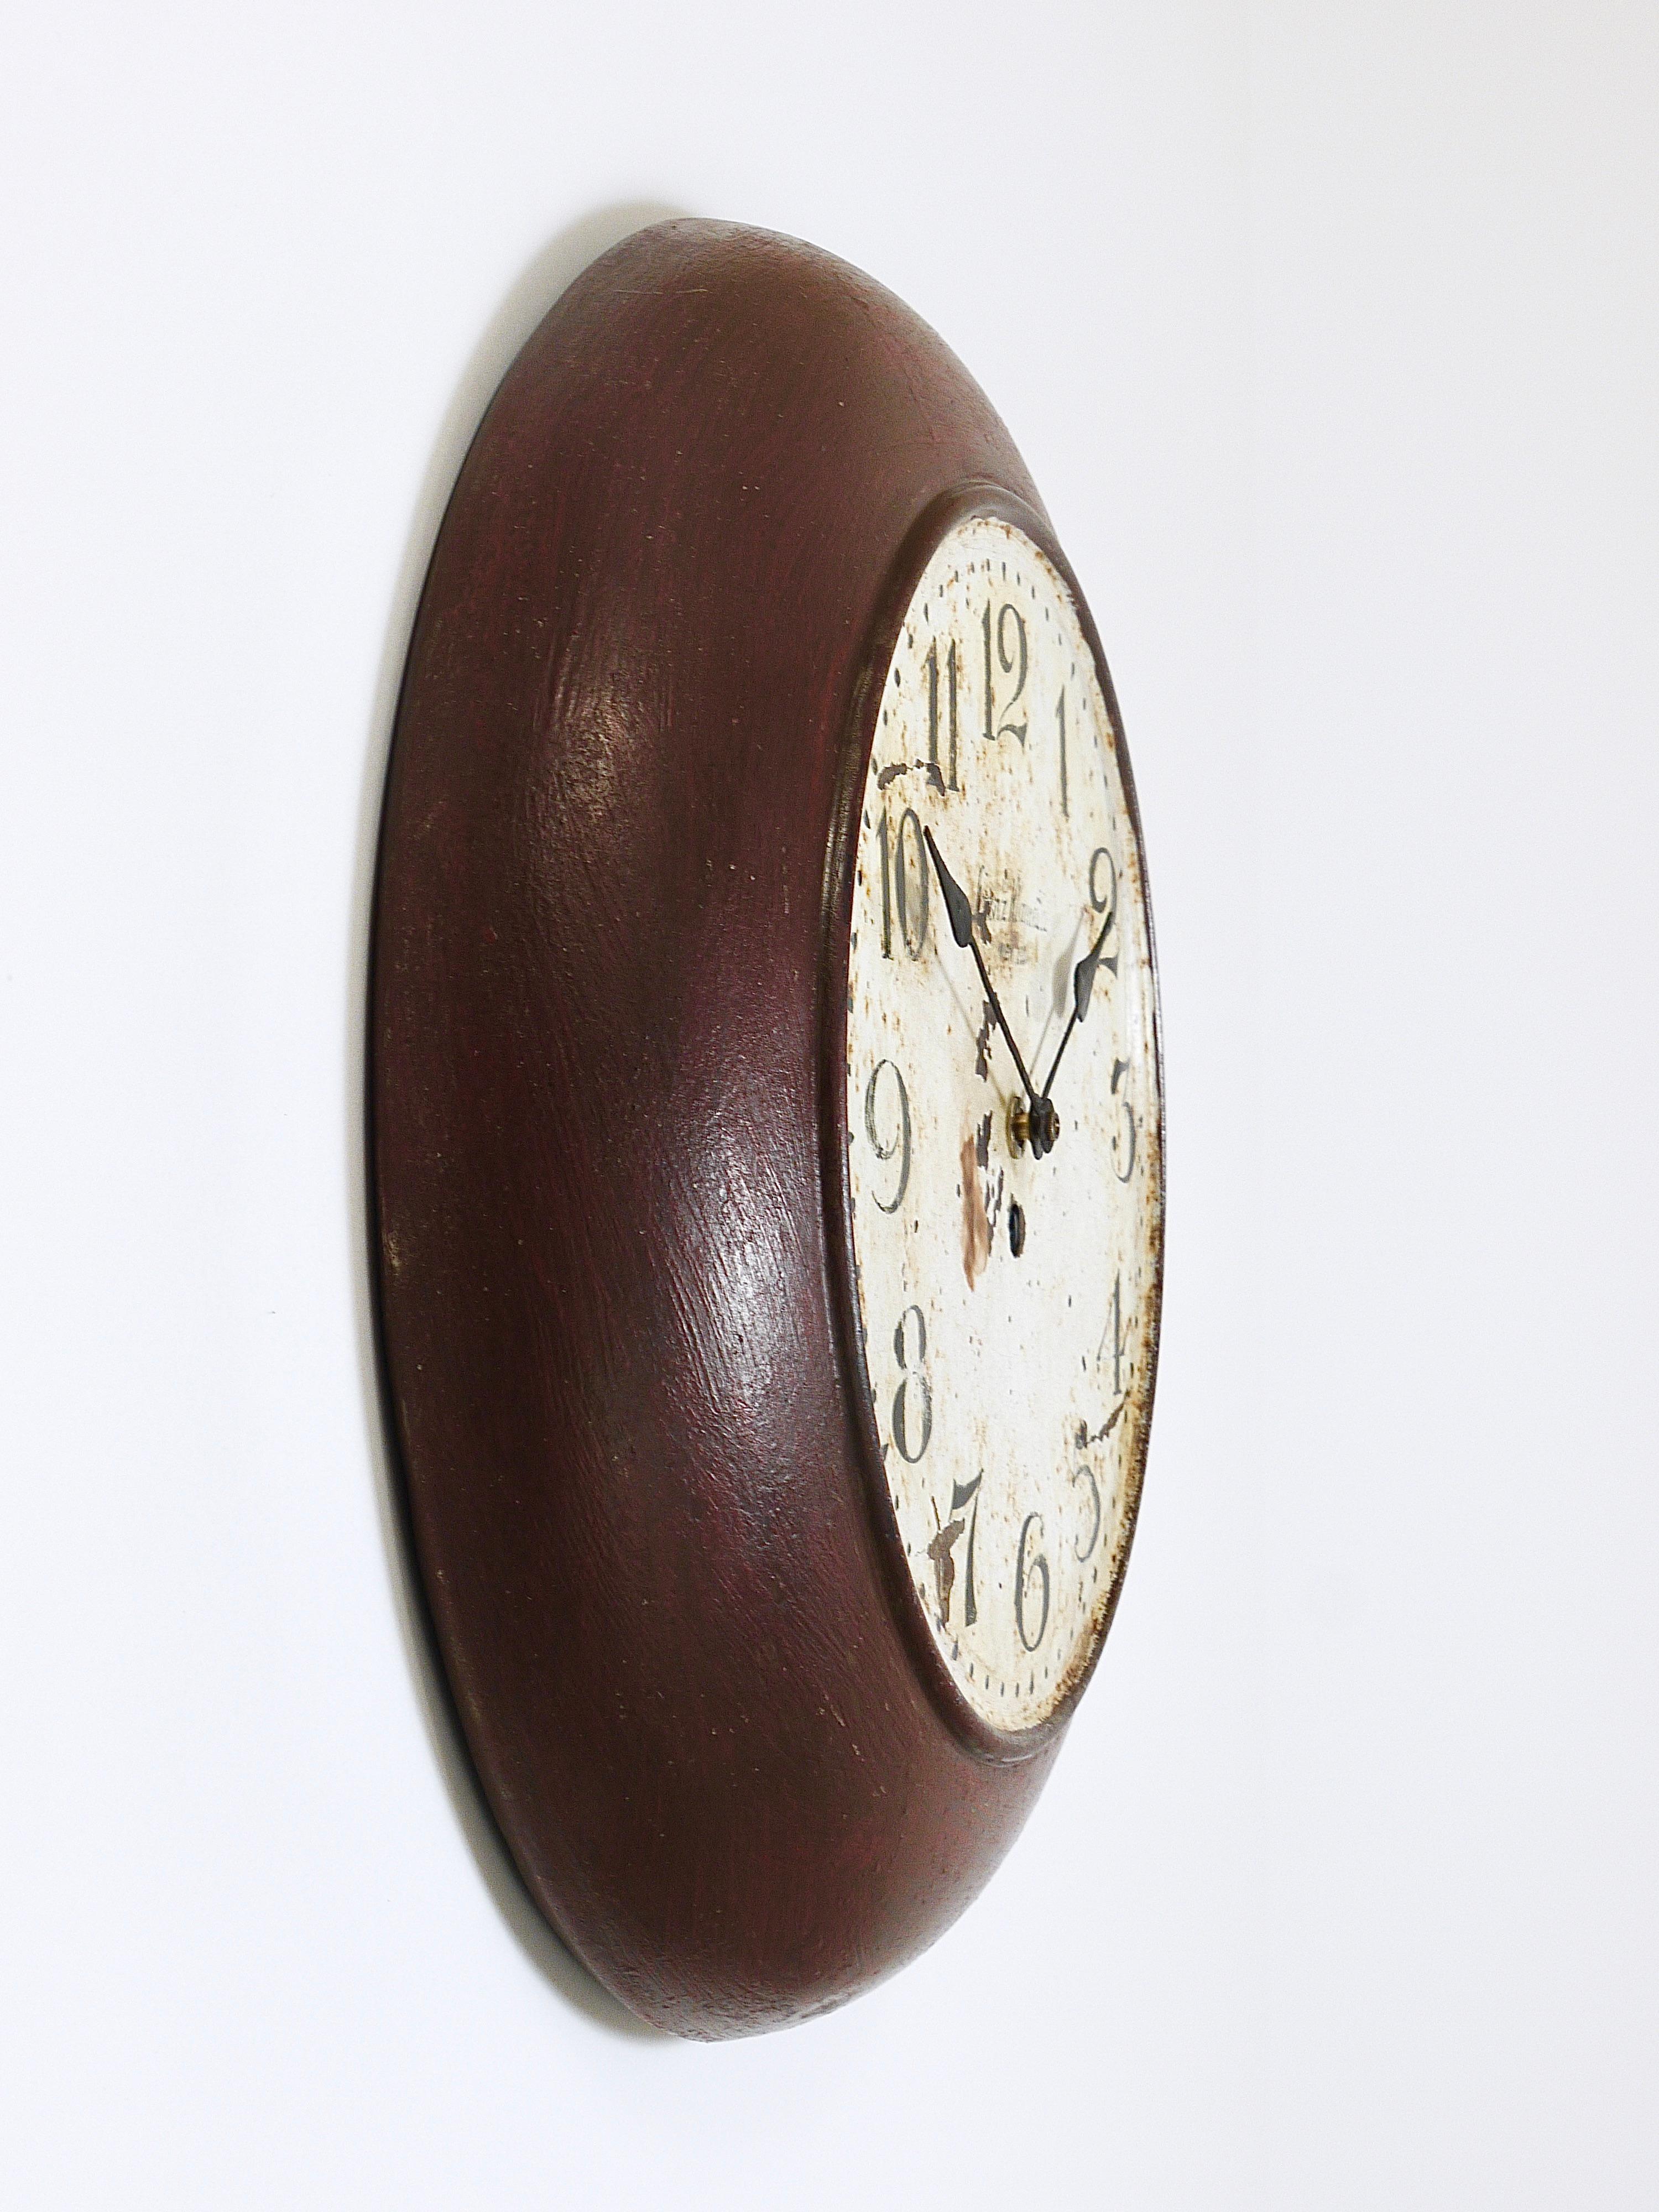 An antique 14.5 inches diameter wall clock from the 1920s, manufactured by clockmaker Franz Klameth, Vienna, Austria. Clocks like these were originally used in public offices, a factory or a train station. Made of metal with a hand-painted clocks